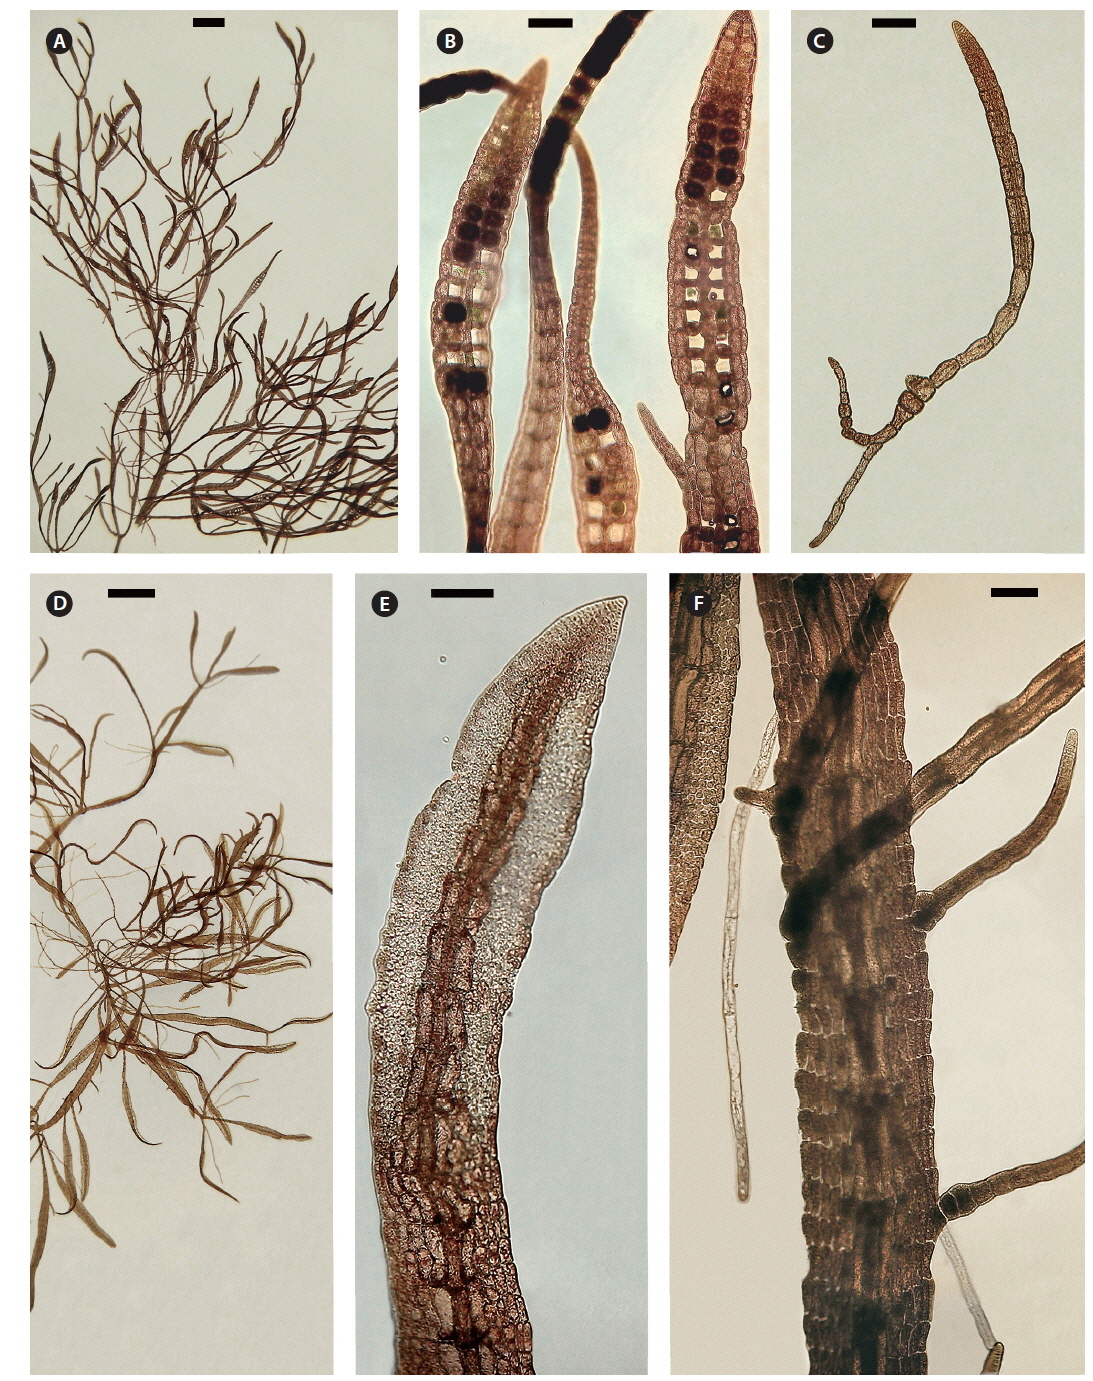 (A) Habit of culture 4841 showing branching, nodes and tetrasporangial sori. (B) Tetrasporangial sori (single row of sporangia on each side of midrib) showing developing, mature and discharged sporangia. (C) Young tetraspore germling with upper blade and rhizoids at base. (D) Mature male with spermatangial sori on many blades. (E) Blade tip with elongate spermatangial sori. (F) Adventitious blades from intermodal marginal wing cells of vegetative blade like that of field specimen, Fig. 2F. Scale bars represent: A & D, 1 mm; B, C, E & F, 100 μm.